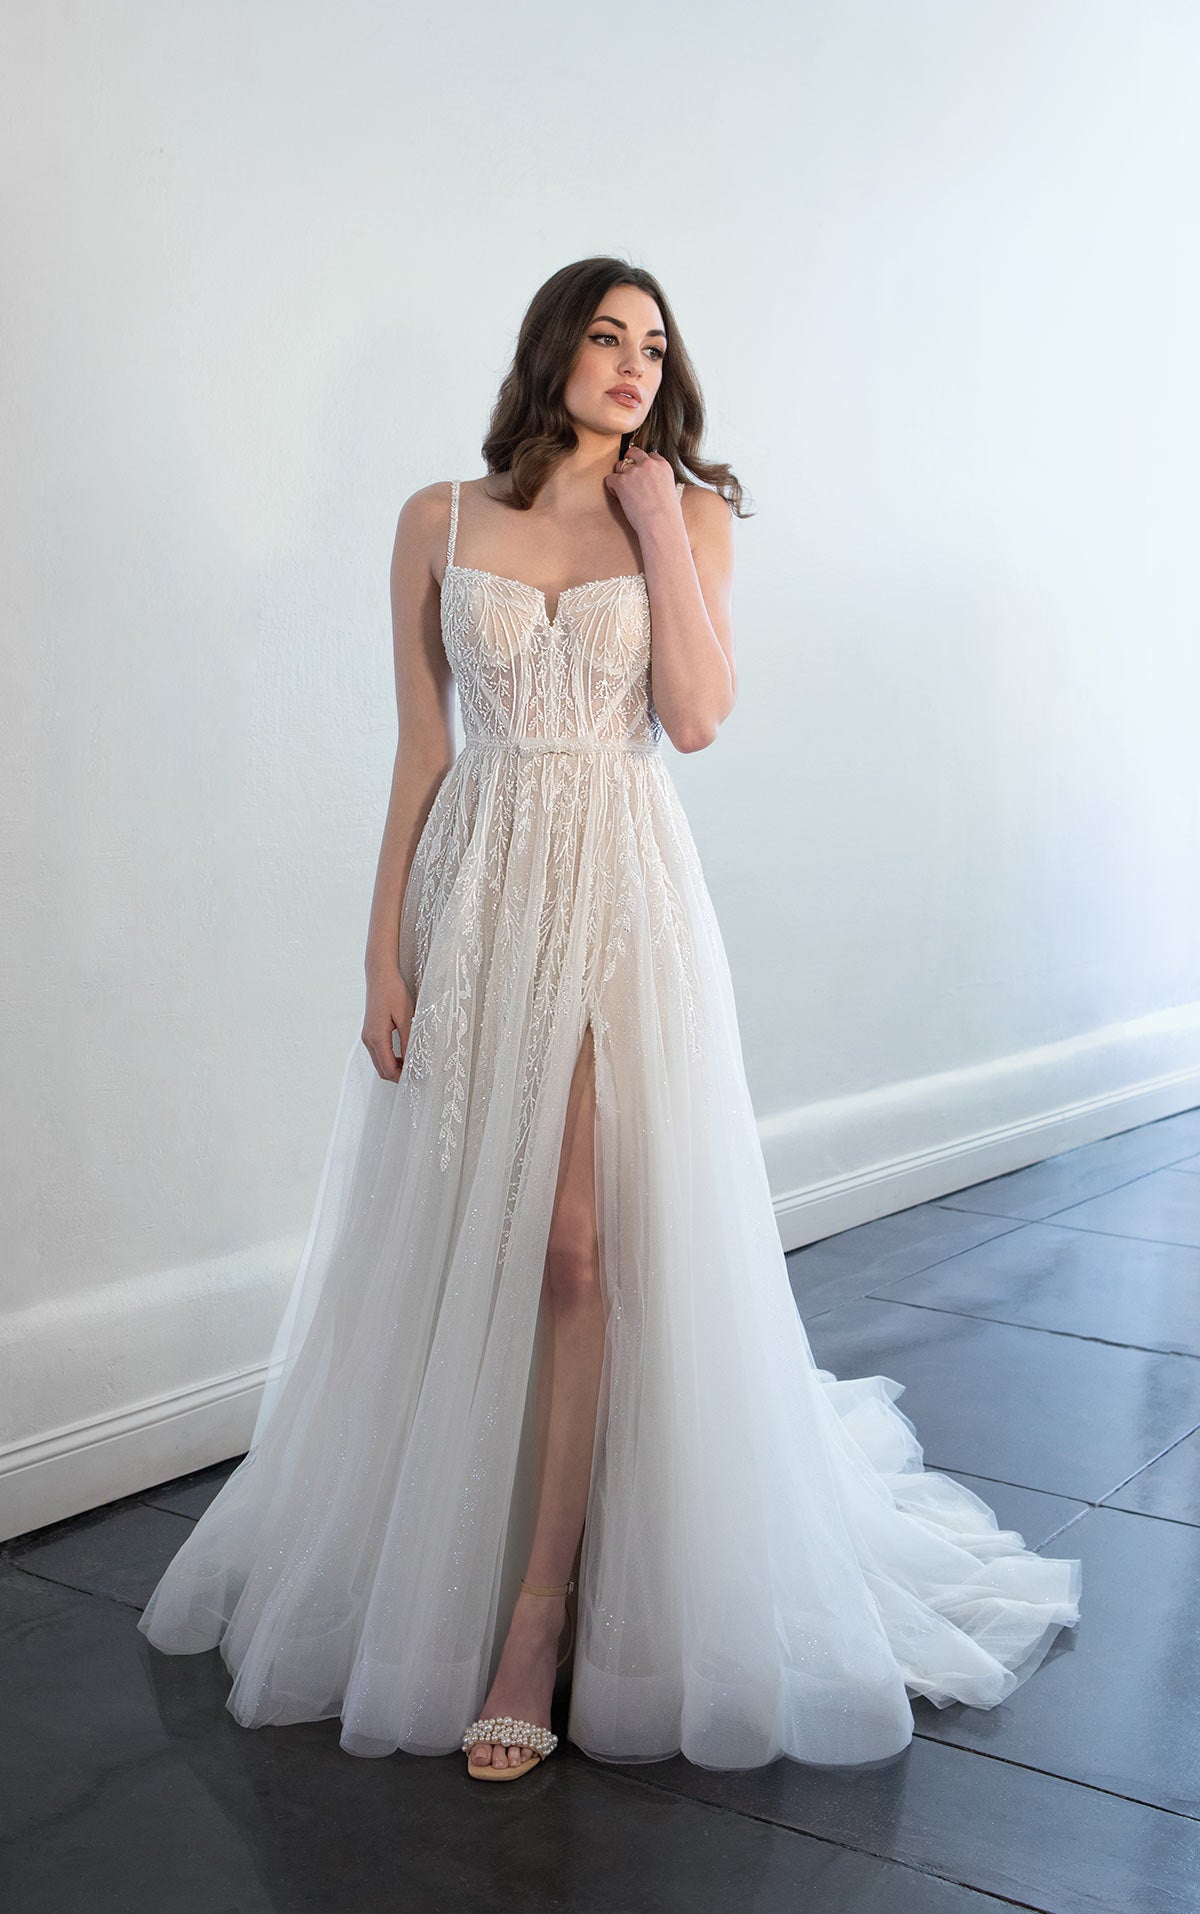 Feast Your Eyes On The Brand New Vivienne Westwood Bridal 2022 Collection -  The Wedding Collective